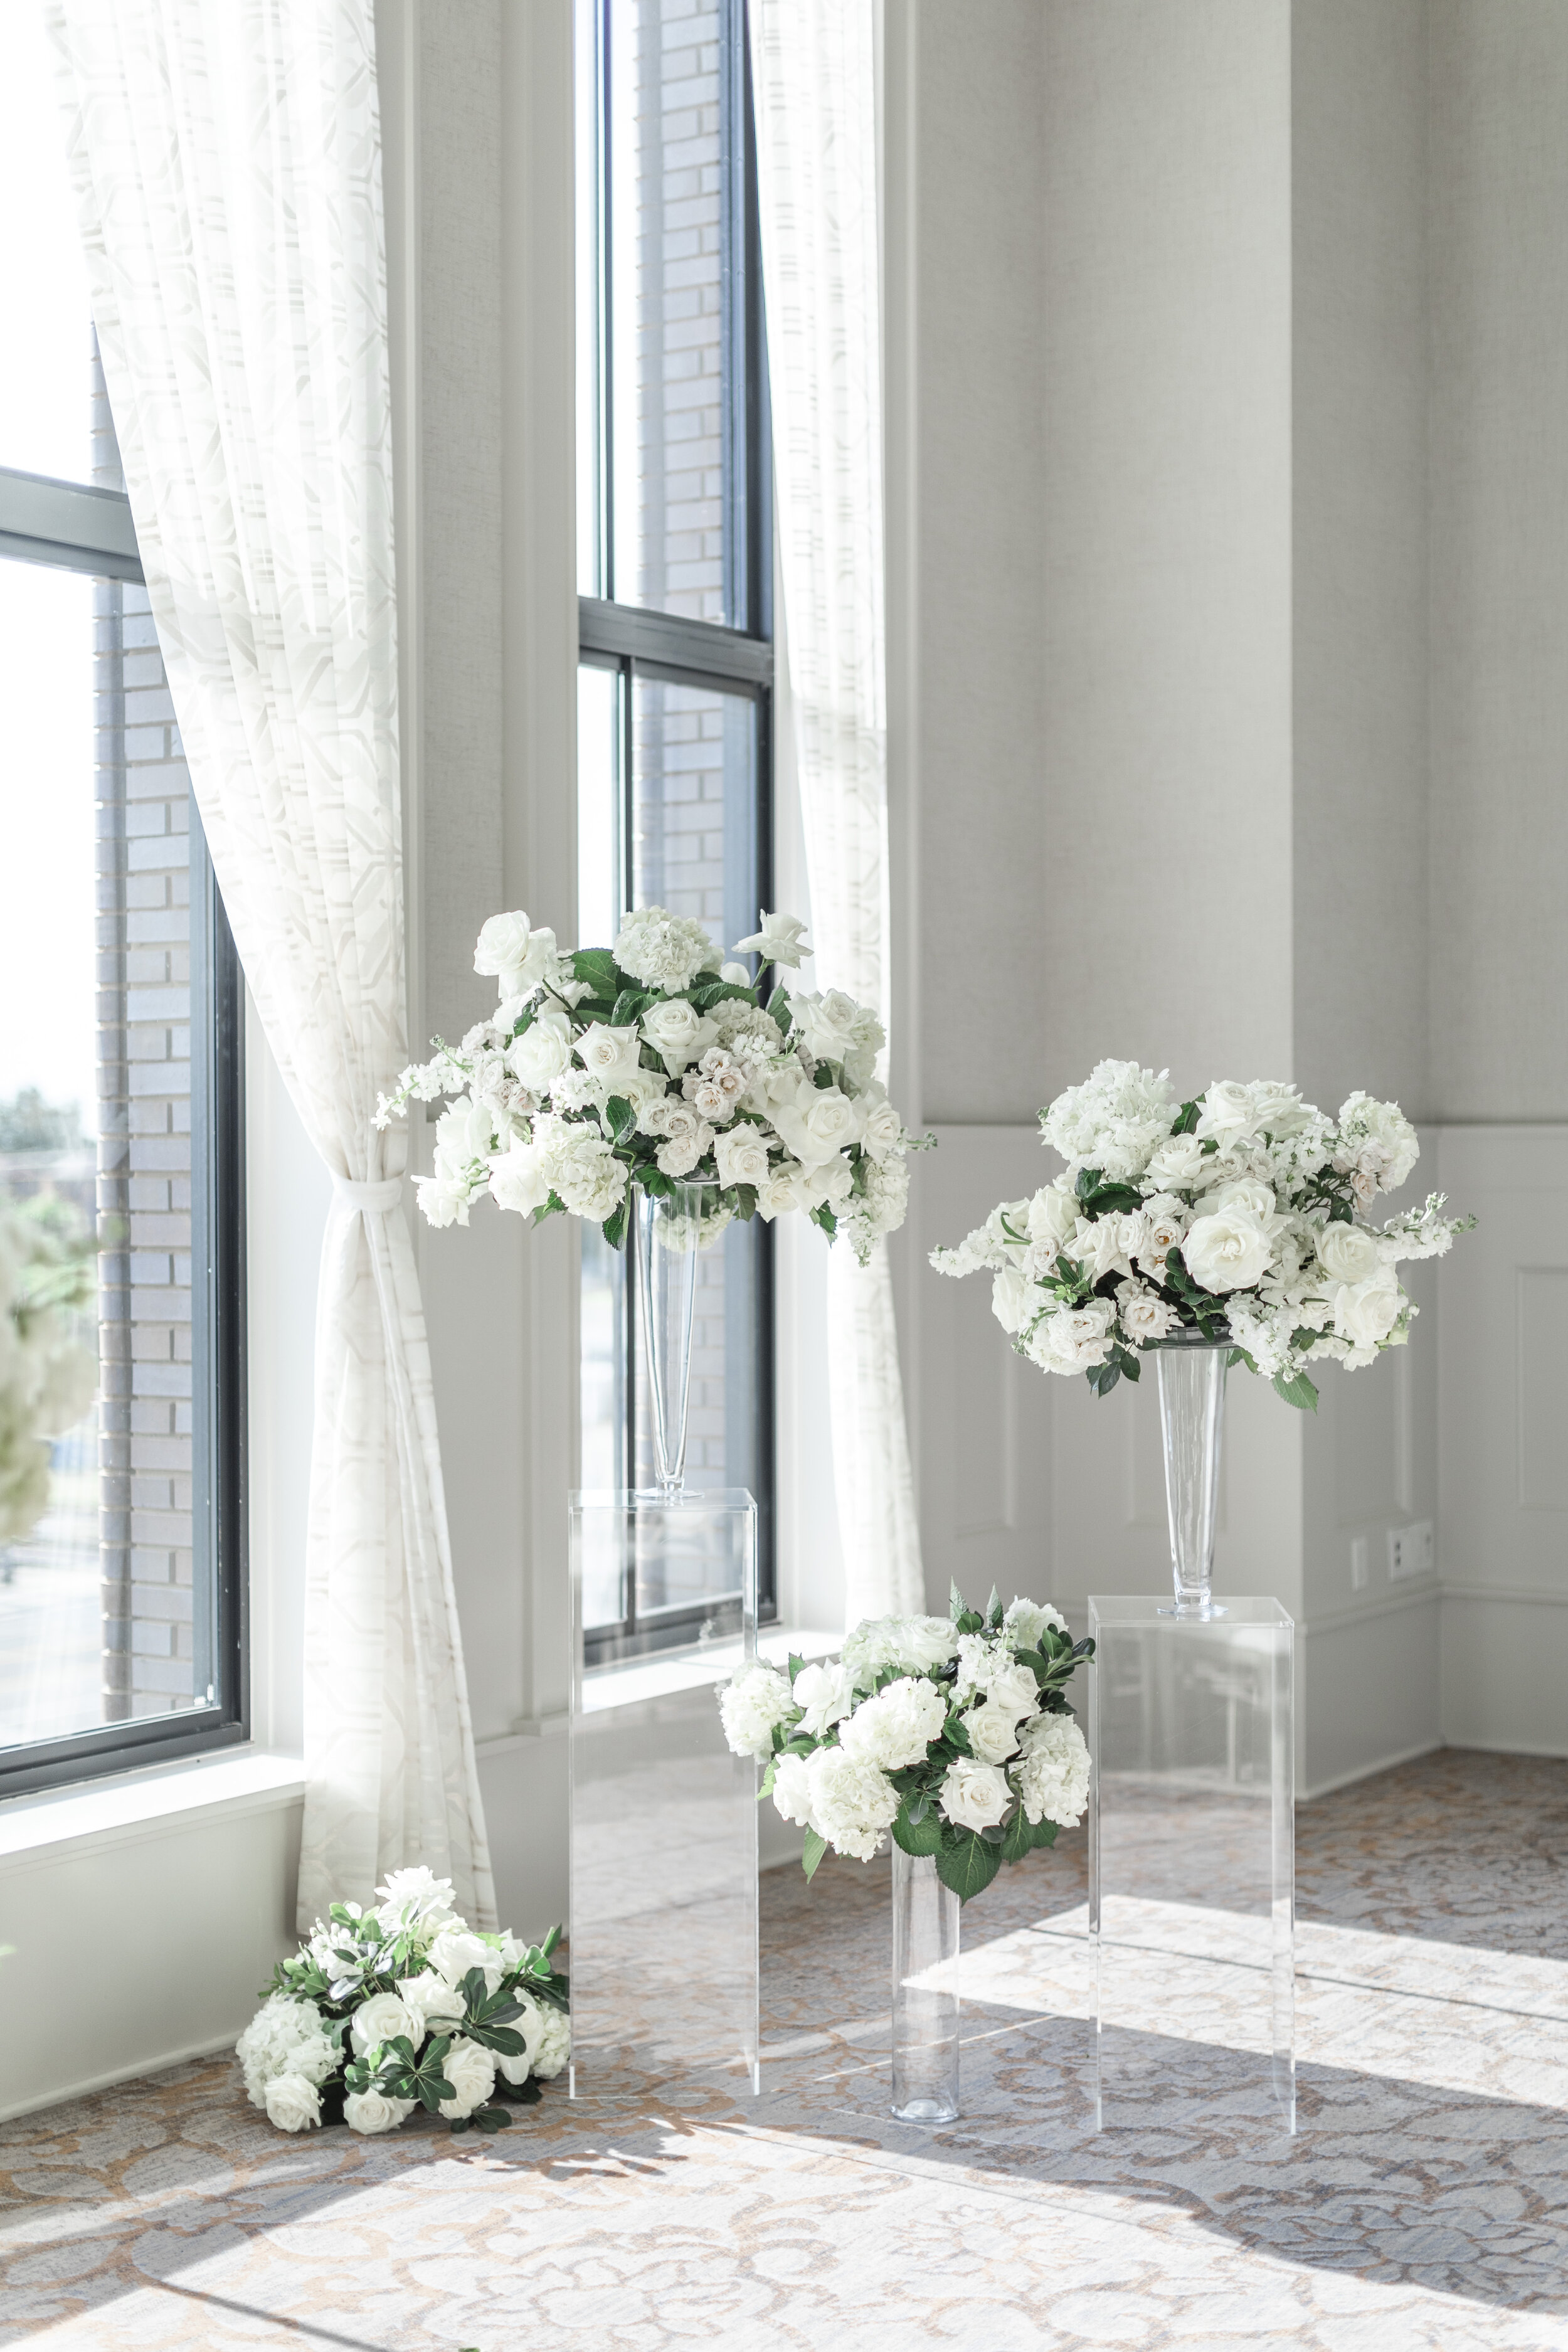  Tiered white flowers on display for an elegant wedding in Grapevine, TX. Ideas for a black and white wedding elegant wedding how to make your wedding high-end white floral inspiration flower ideas how to decorate a wedding with white flowers savanna